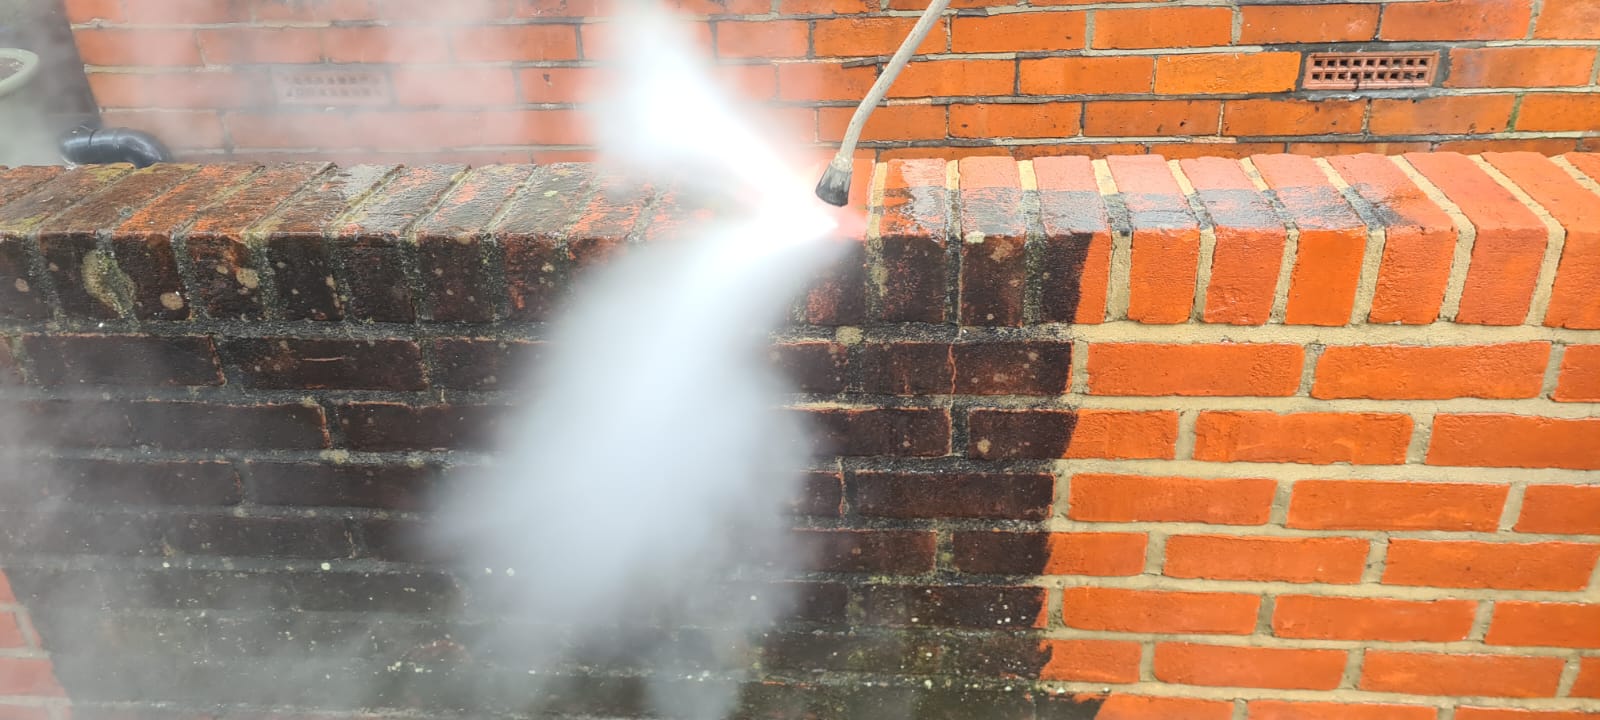 Cleaning a brick wall using a pressure washer, showing the improvement of the wall before compared to after.